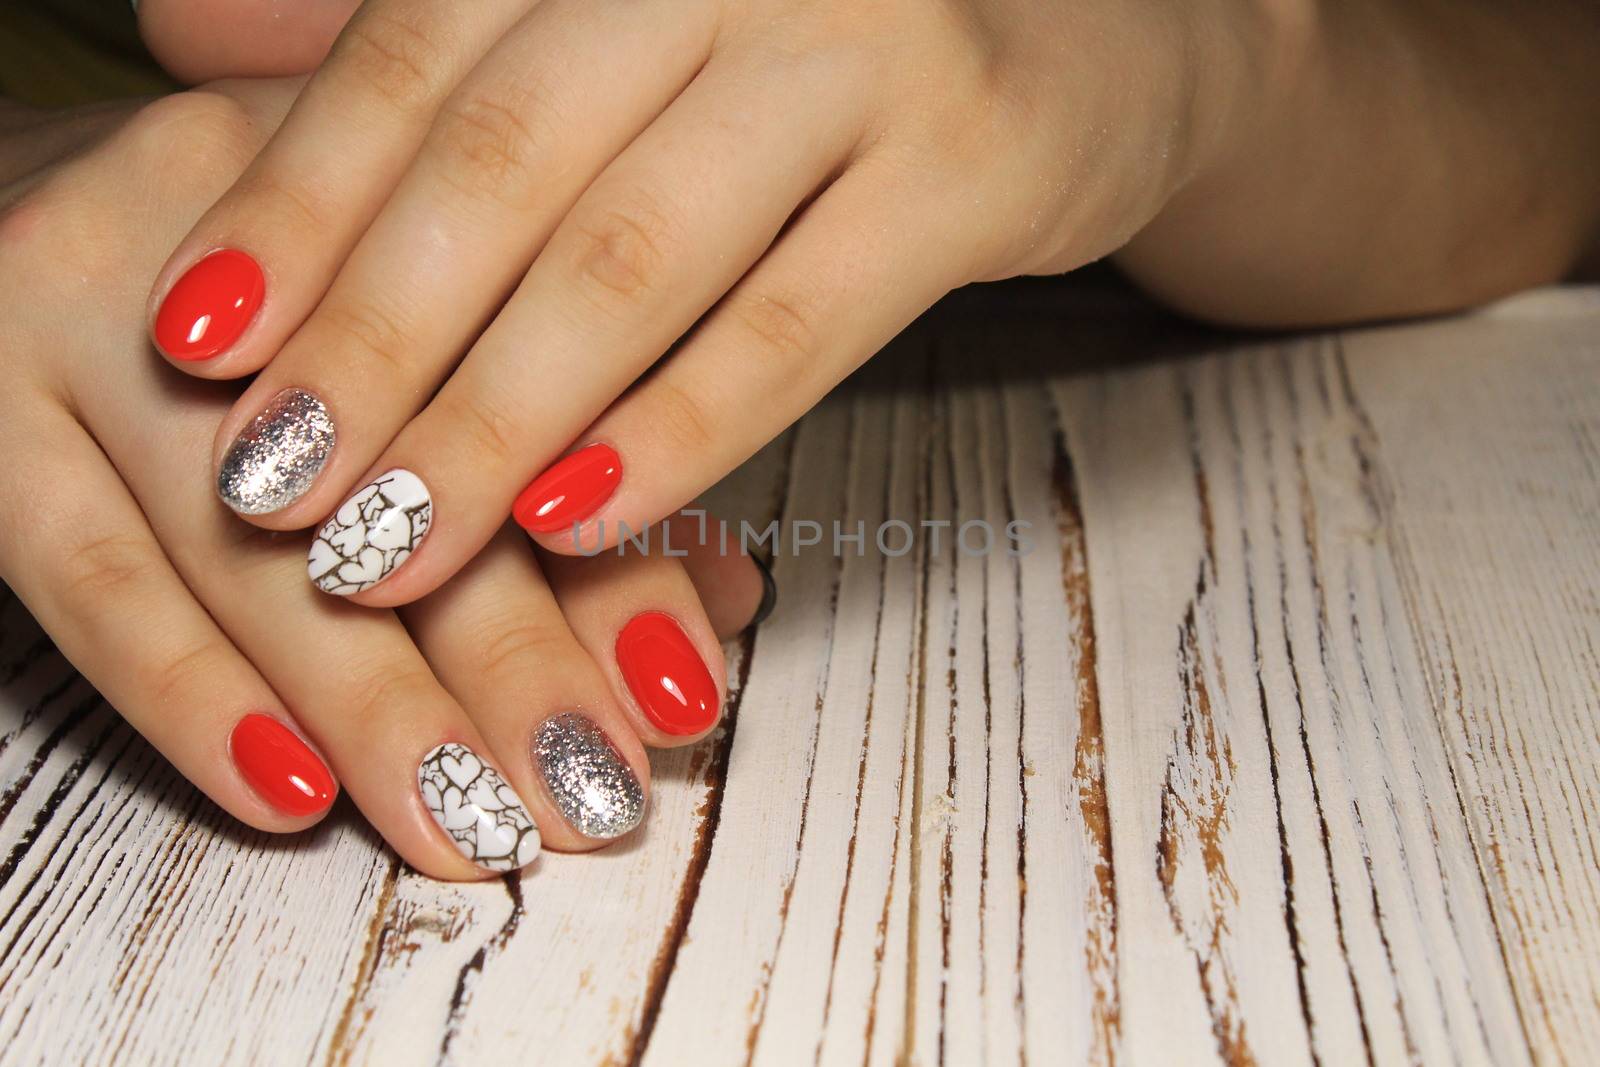 Manicured nails colored with red nail polish by SmirMaxStock